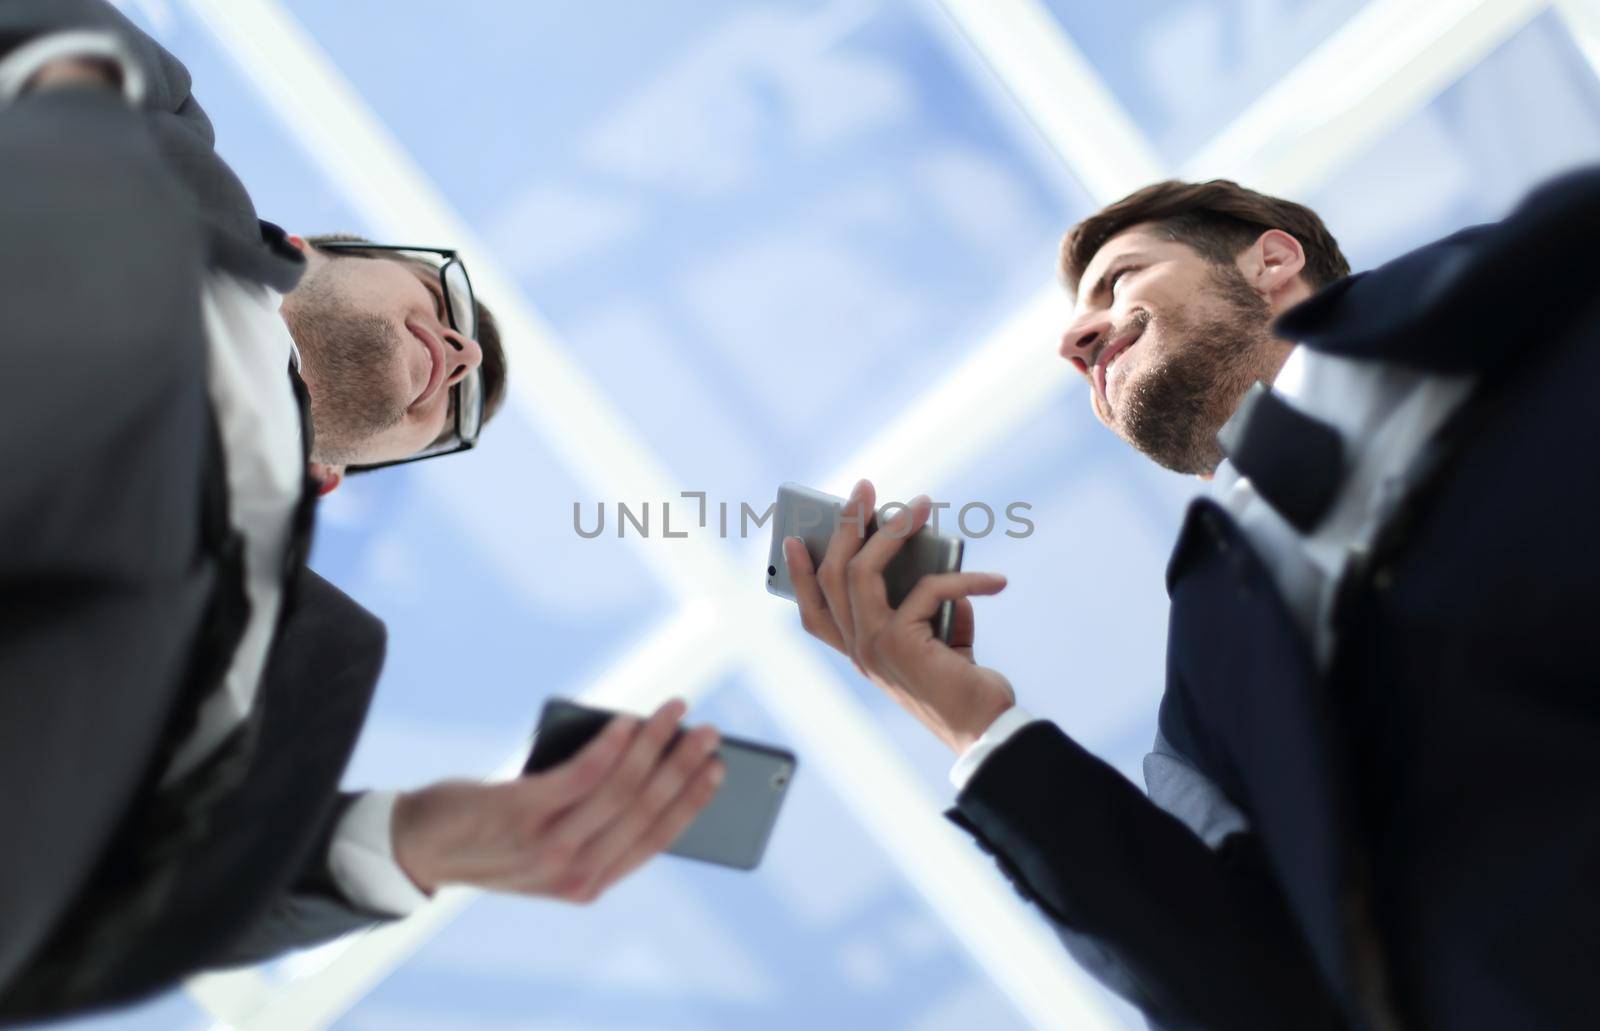 two businessmen use mobile phones, view from below